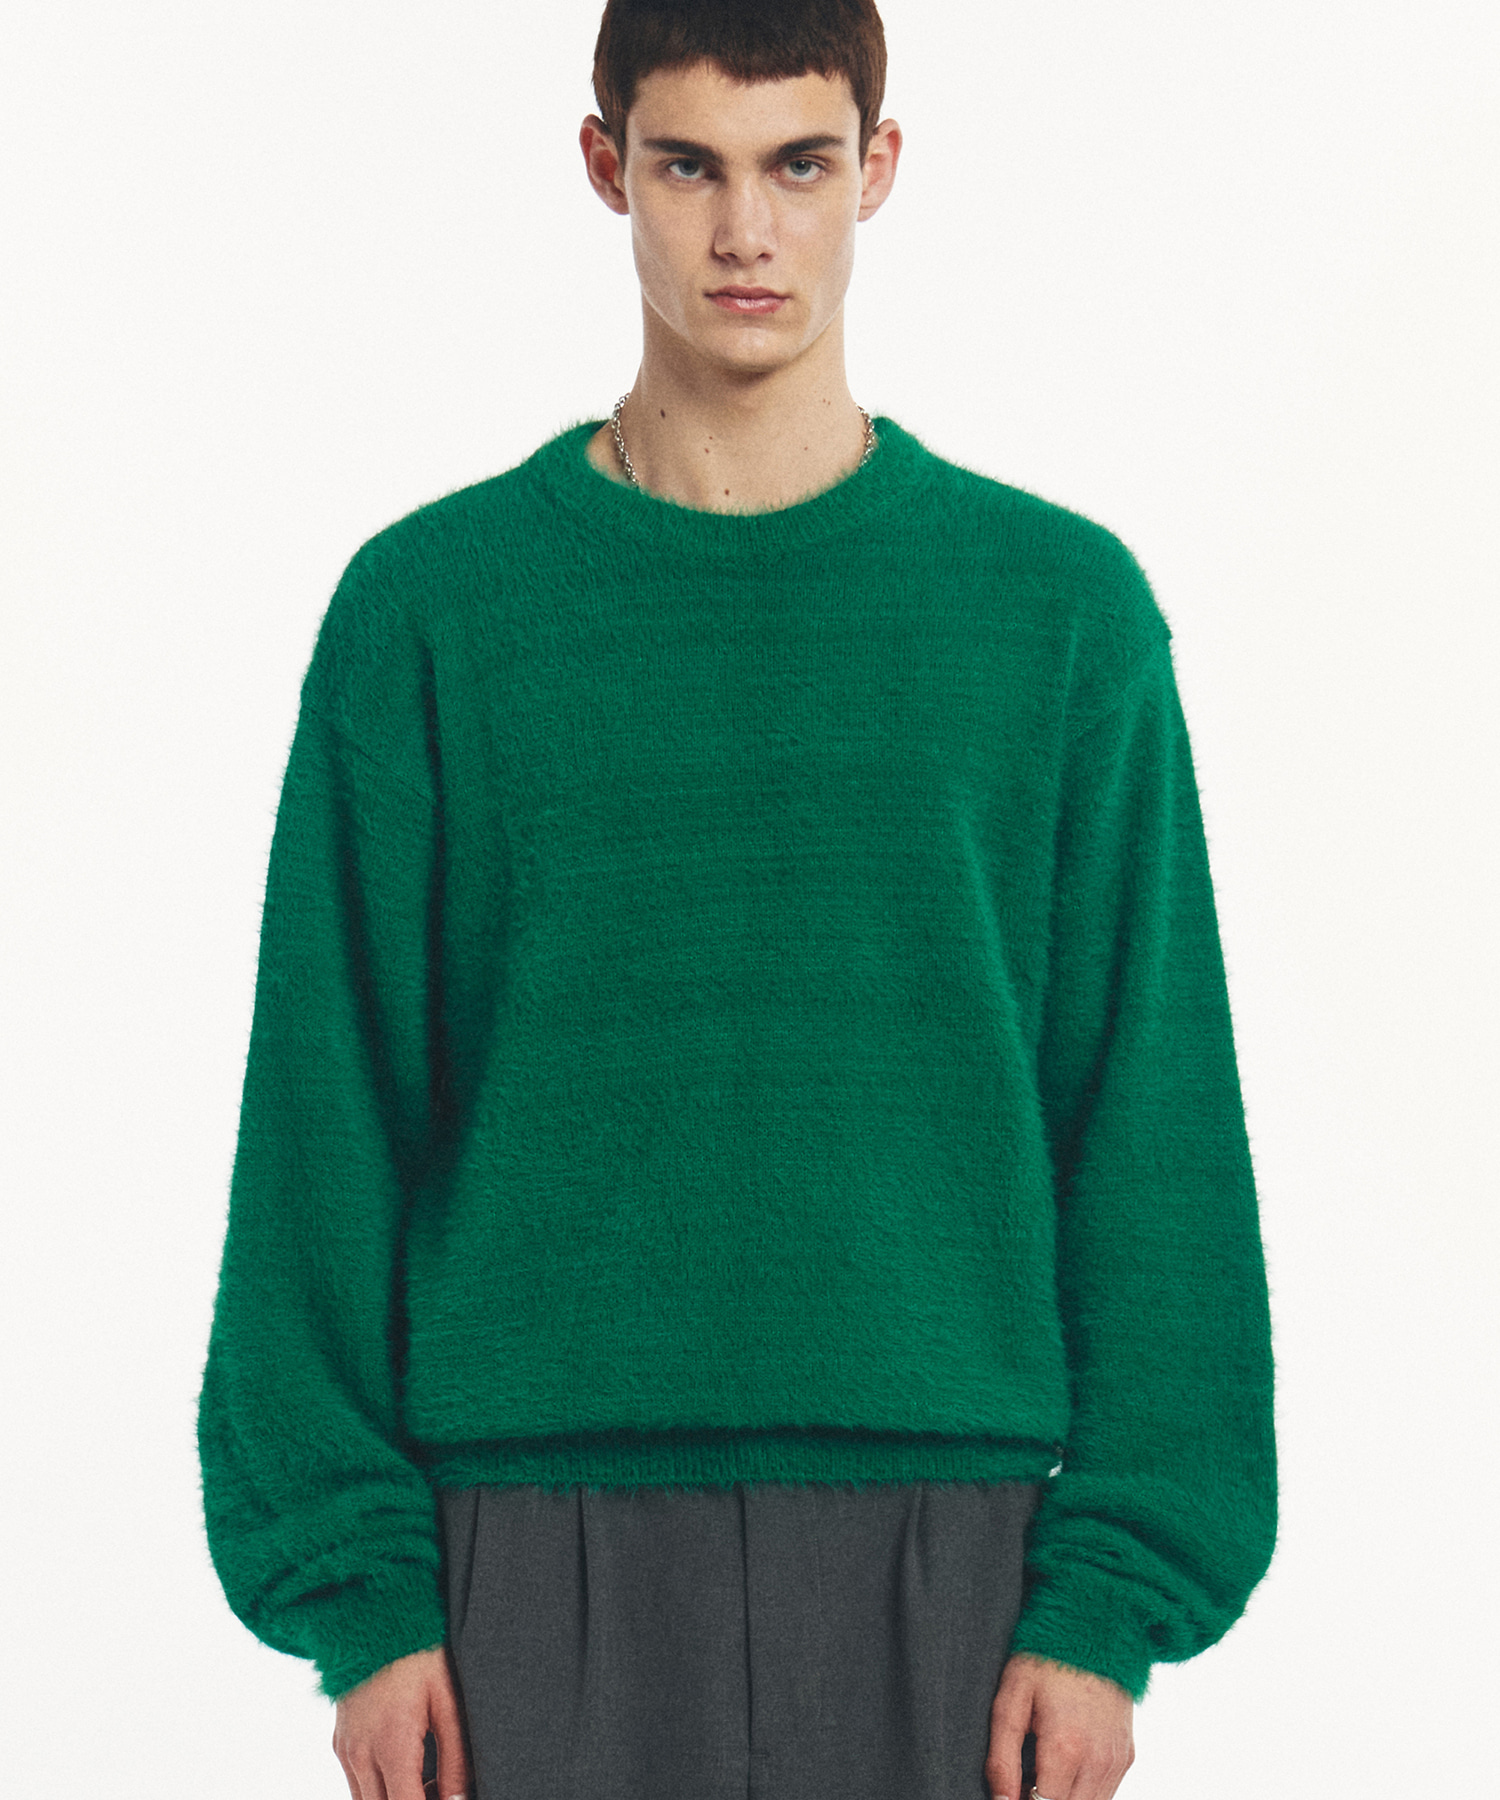 Nomad Hairy Knit GREEN (SQUARE SEONG-SU EDITION)